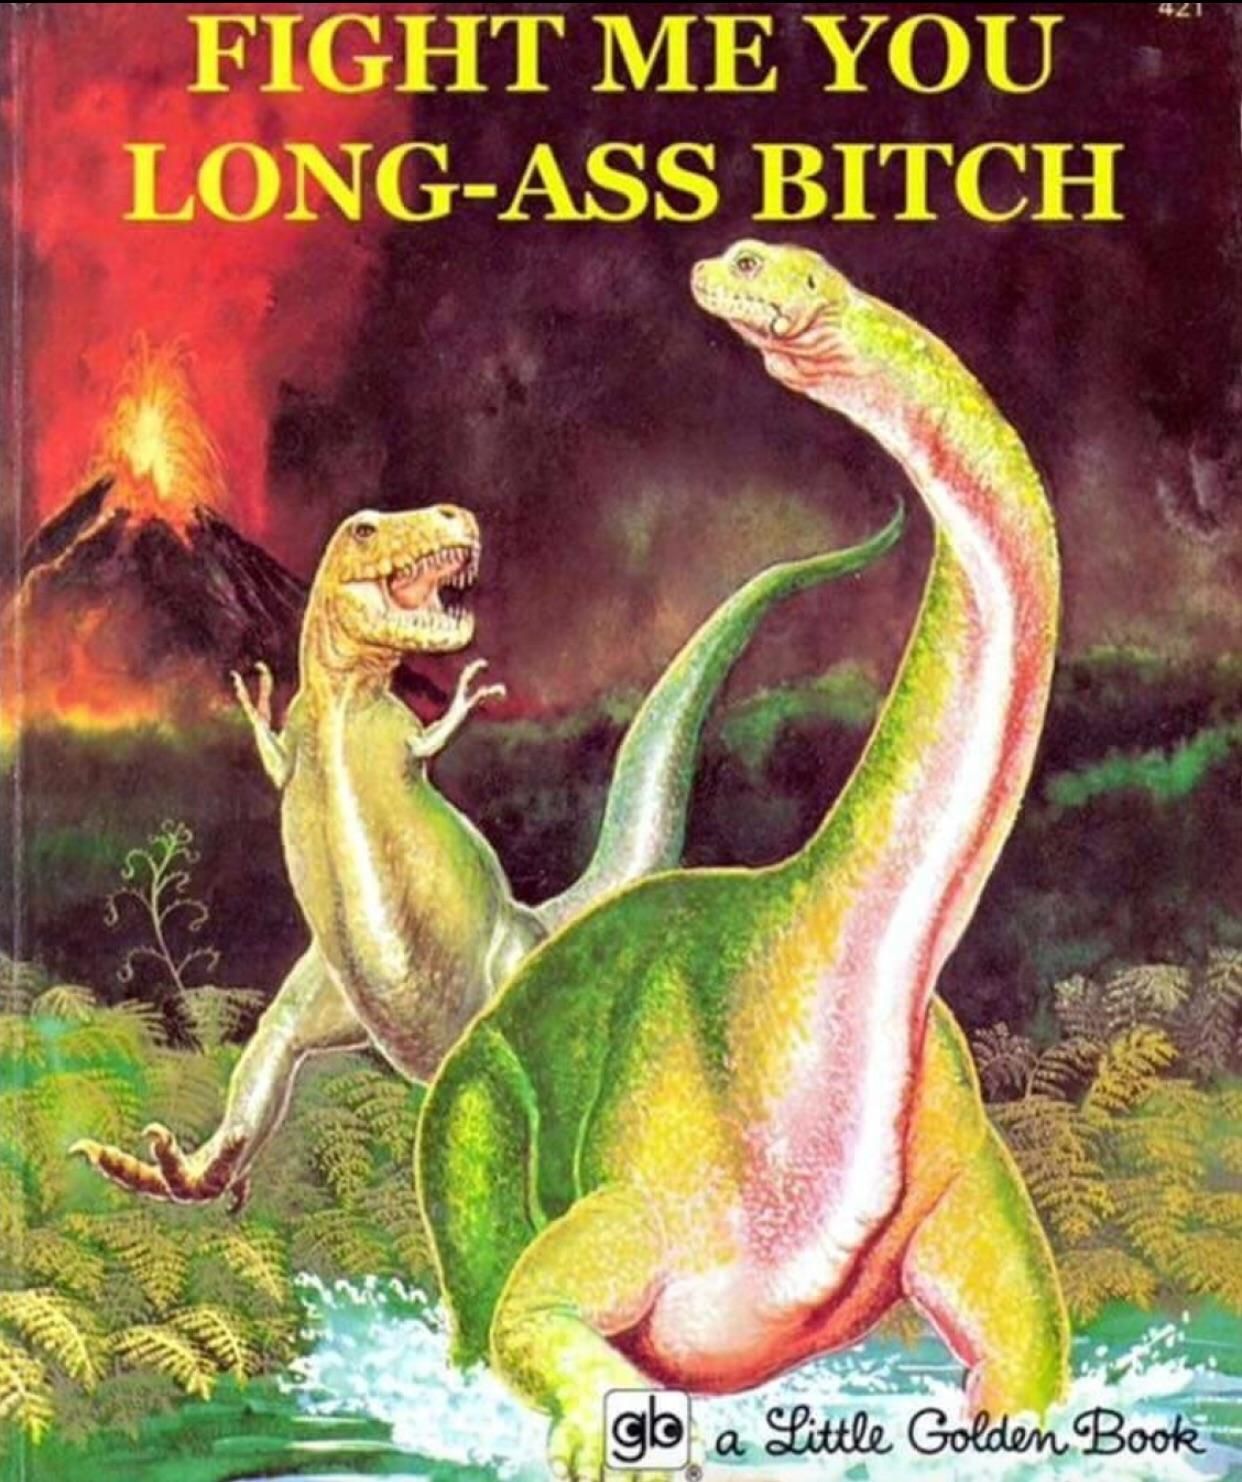 My favorite book from my childhood